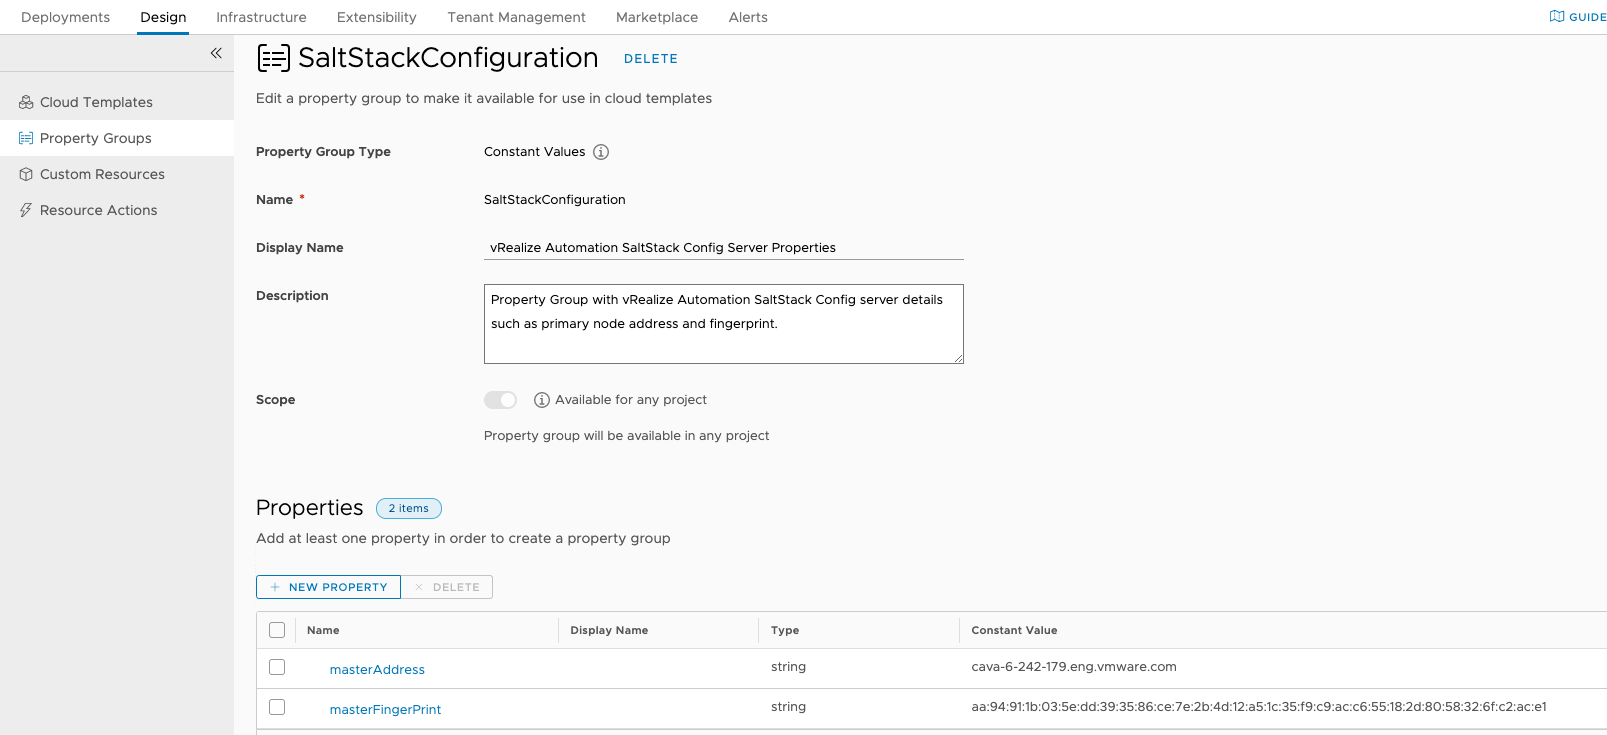 Screen shows the vRealize Automation property groups page and the "SaltStackConfiguration" property group created when SaltStack Config is installed